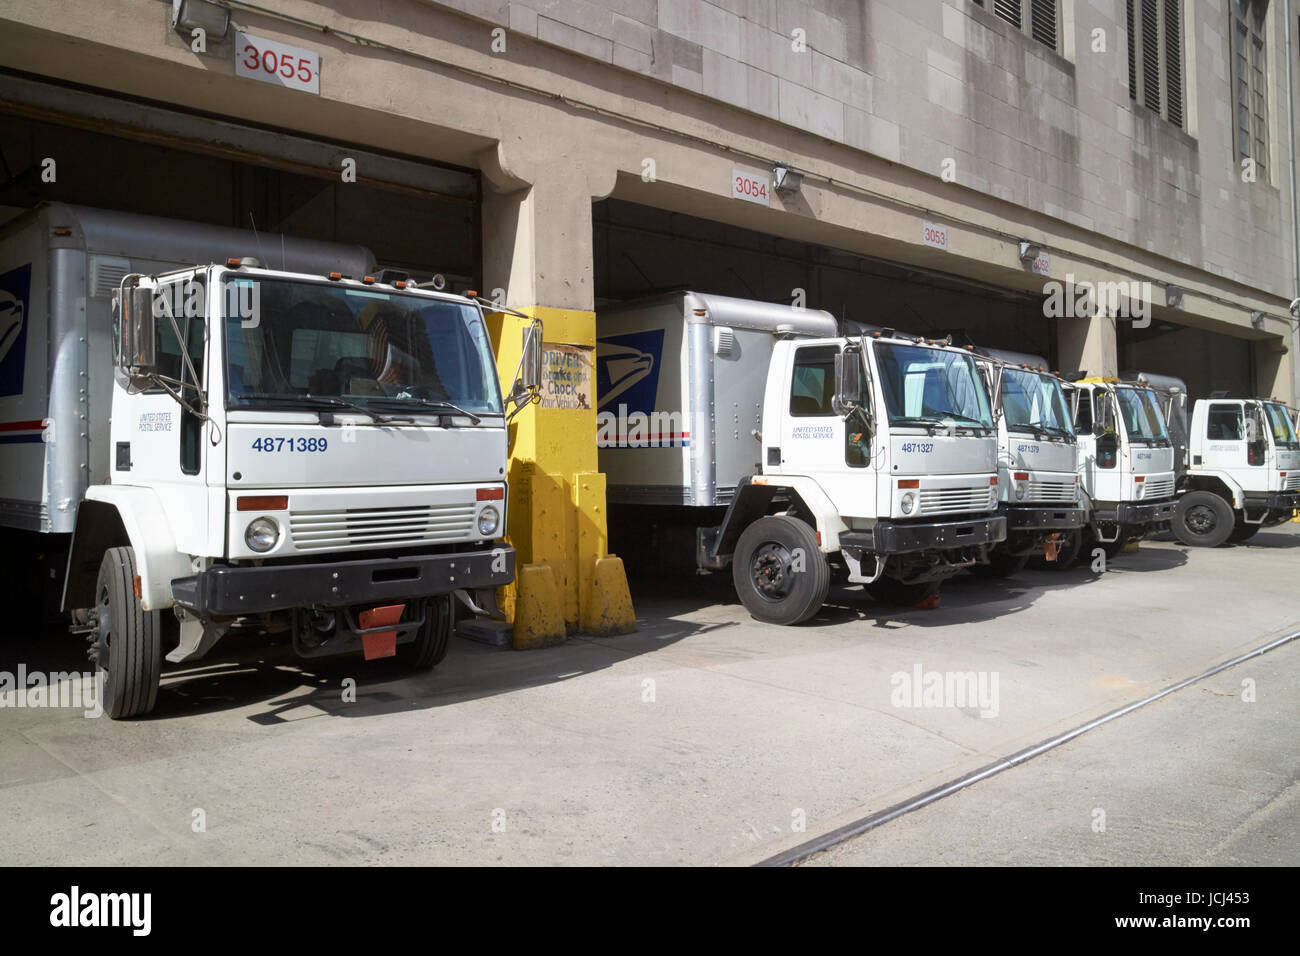 loading bays full of usps delivery trucks morgan general mail facility New York City USA Stock Photo